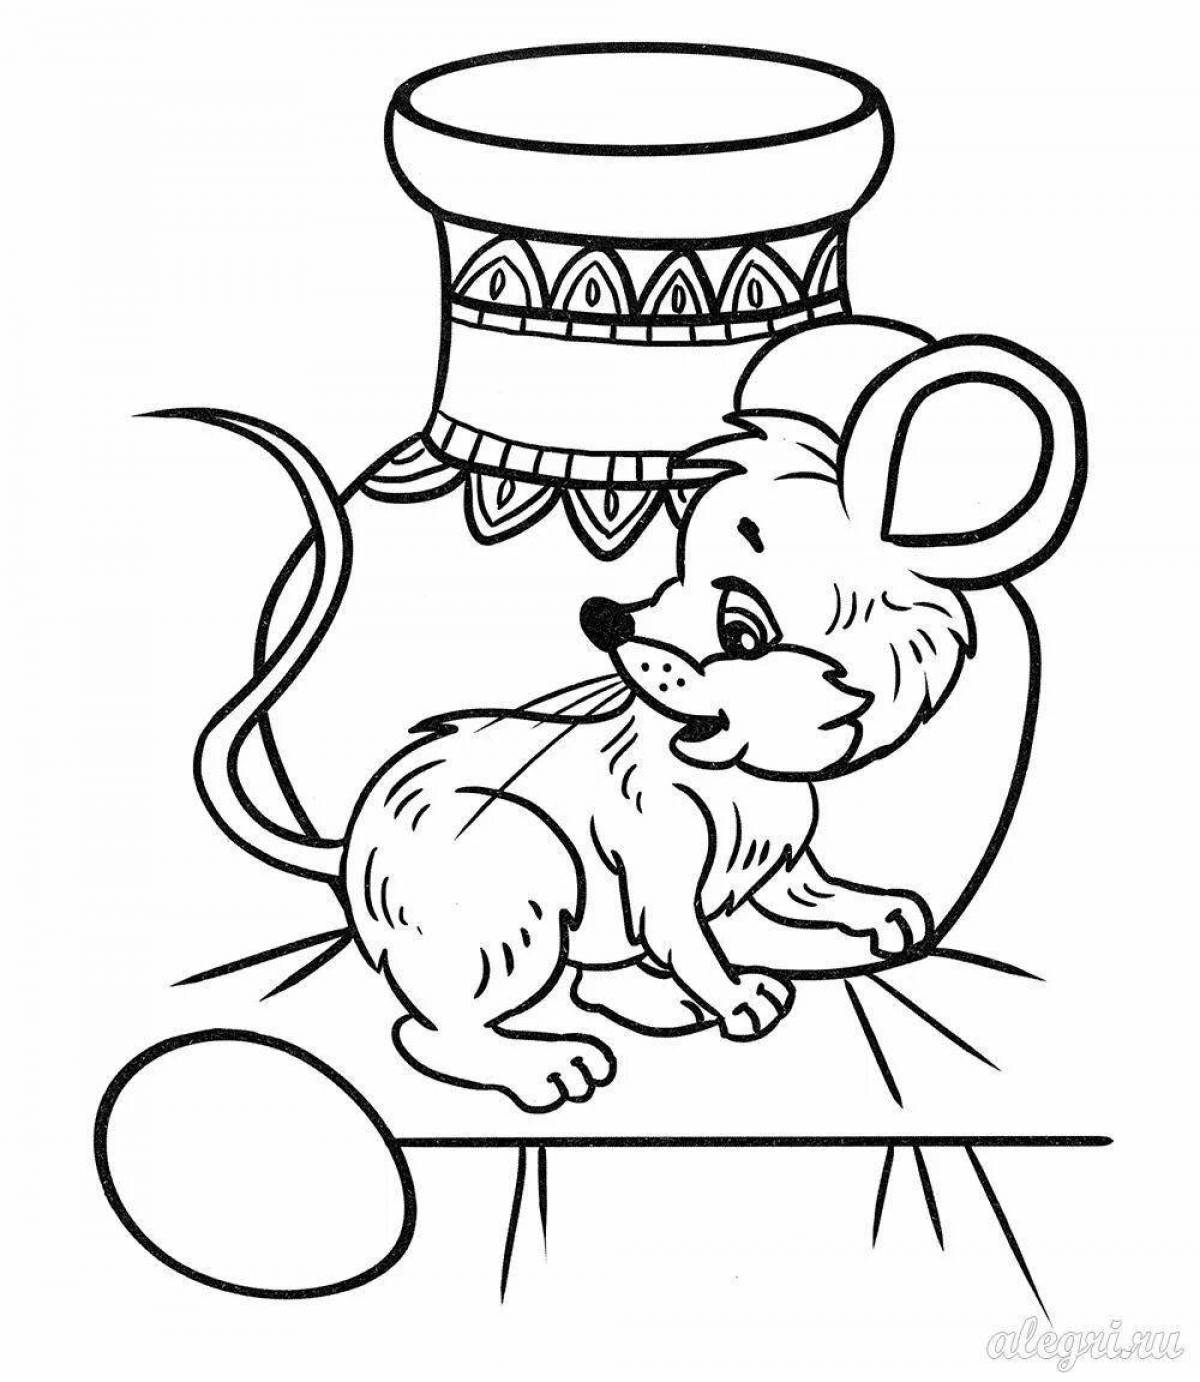 Cute coloring book baby mitten